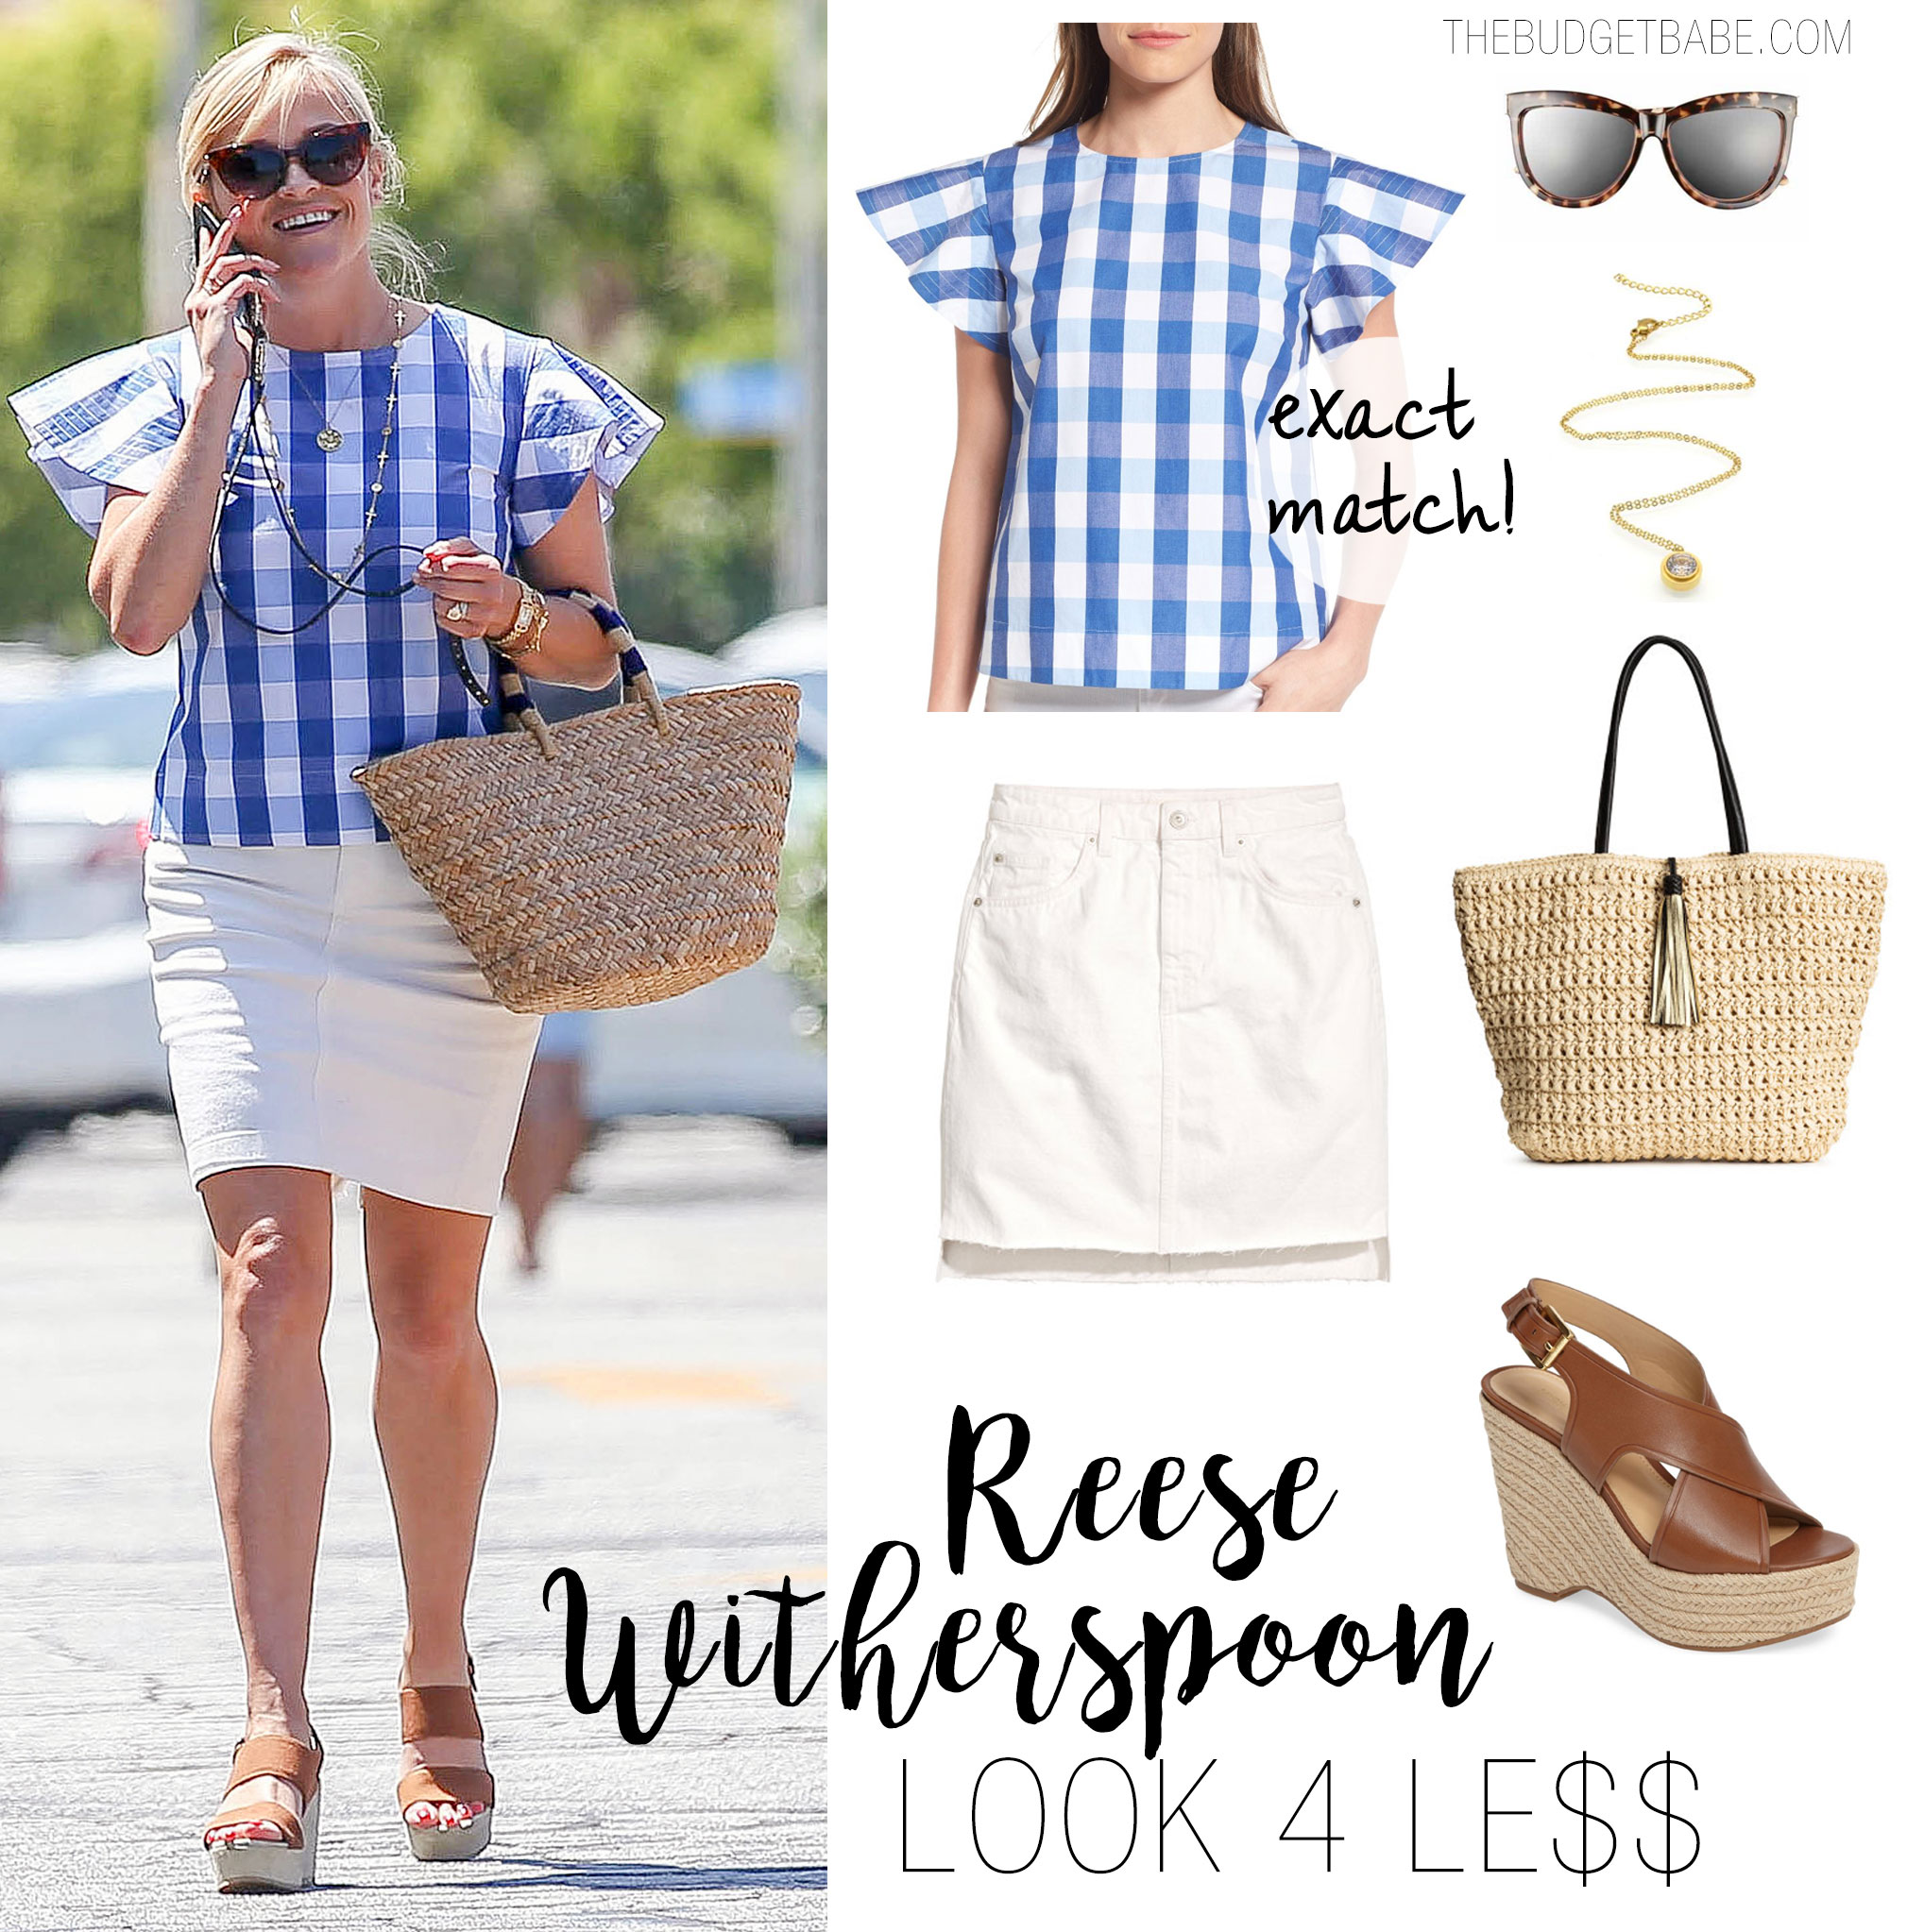 Reese Witherspoon Gingham Top and Off-White Skirt Look for Less